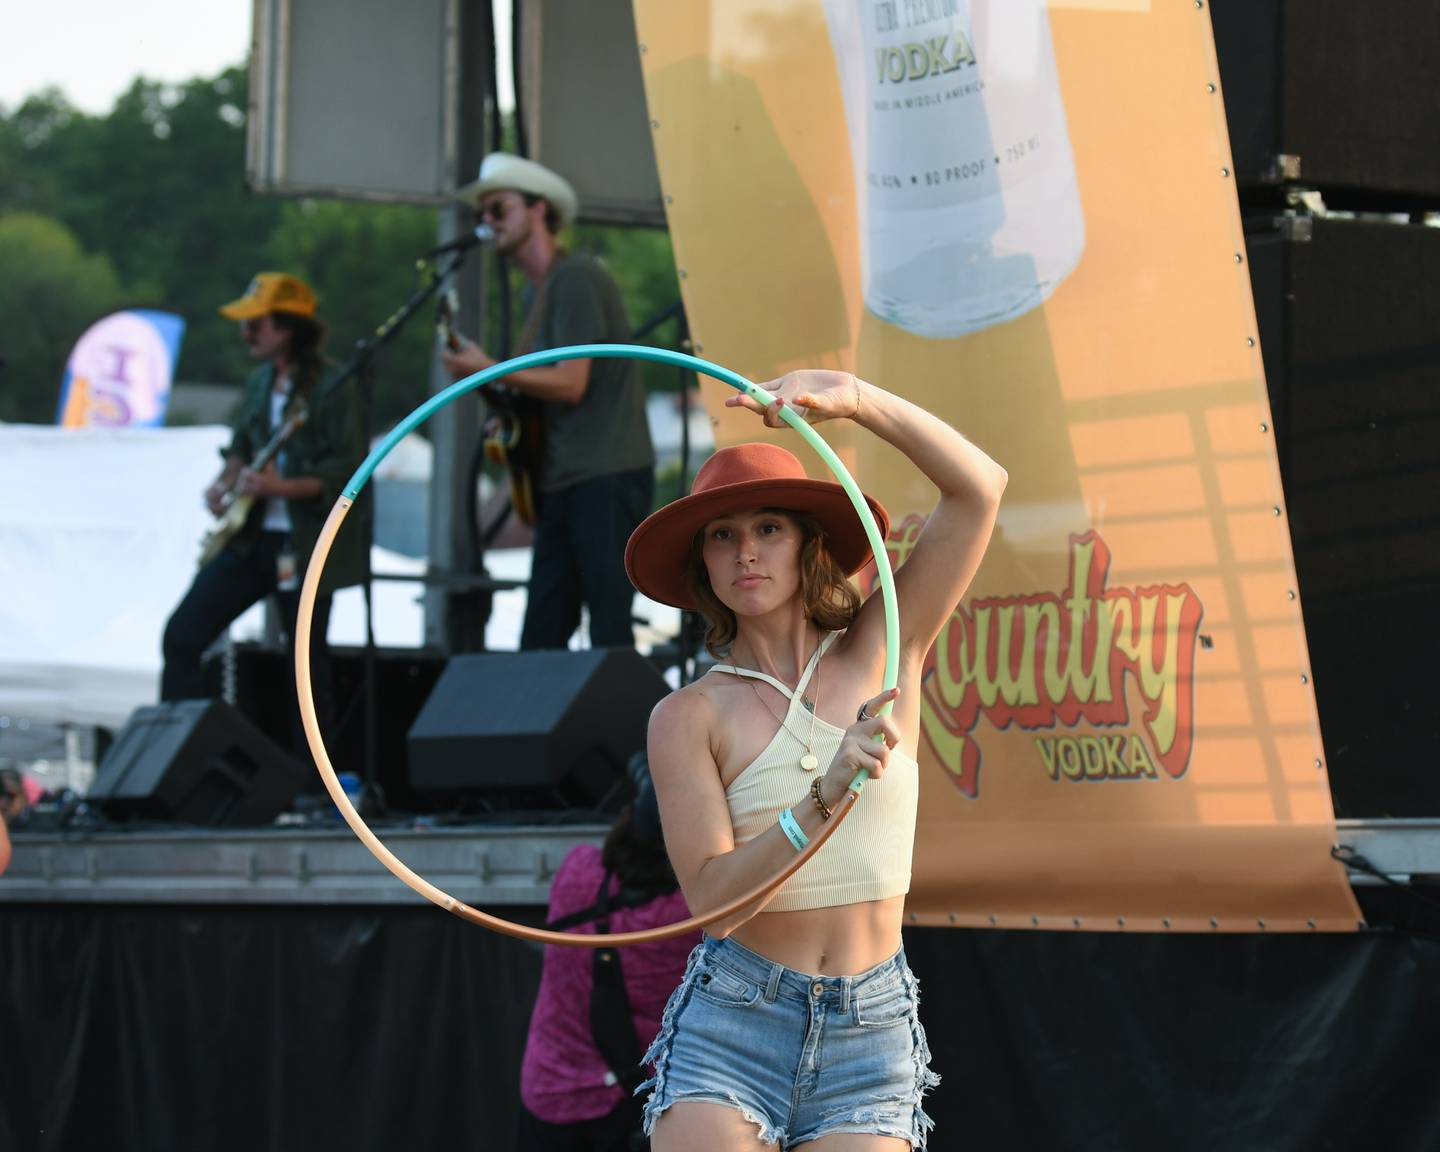 Teala Marie of Yorkville shows her skills with a hoop while the Miles Miller Band performs on Friday June 23, 2023 during the Summer Solstice Music Festival in downtown Yorkville.